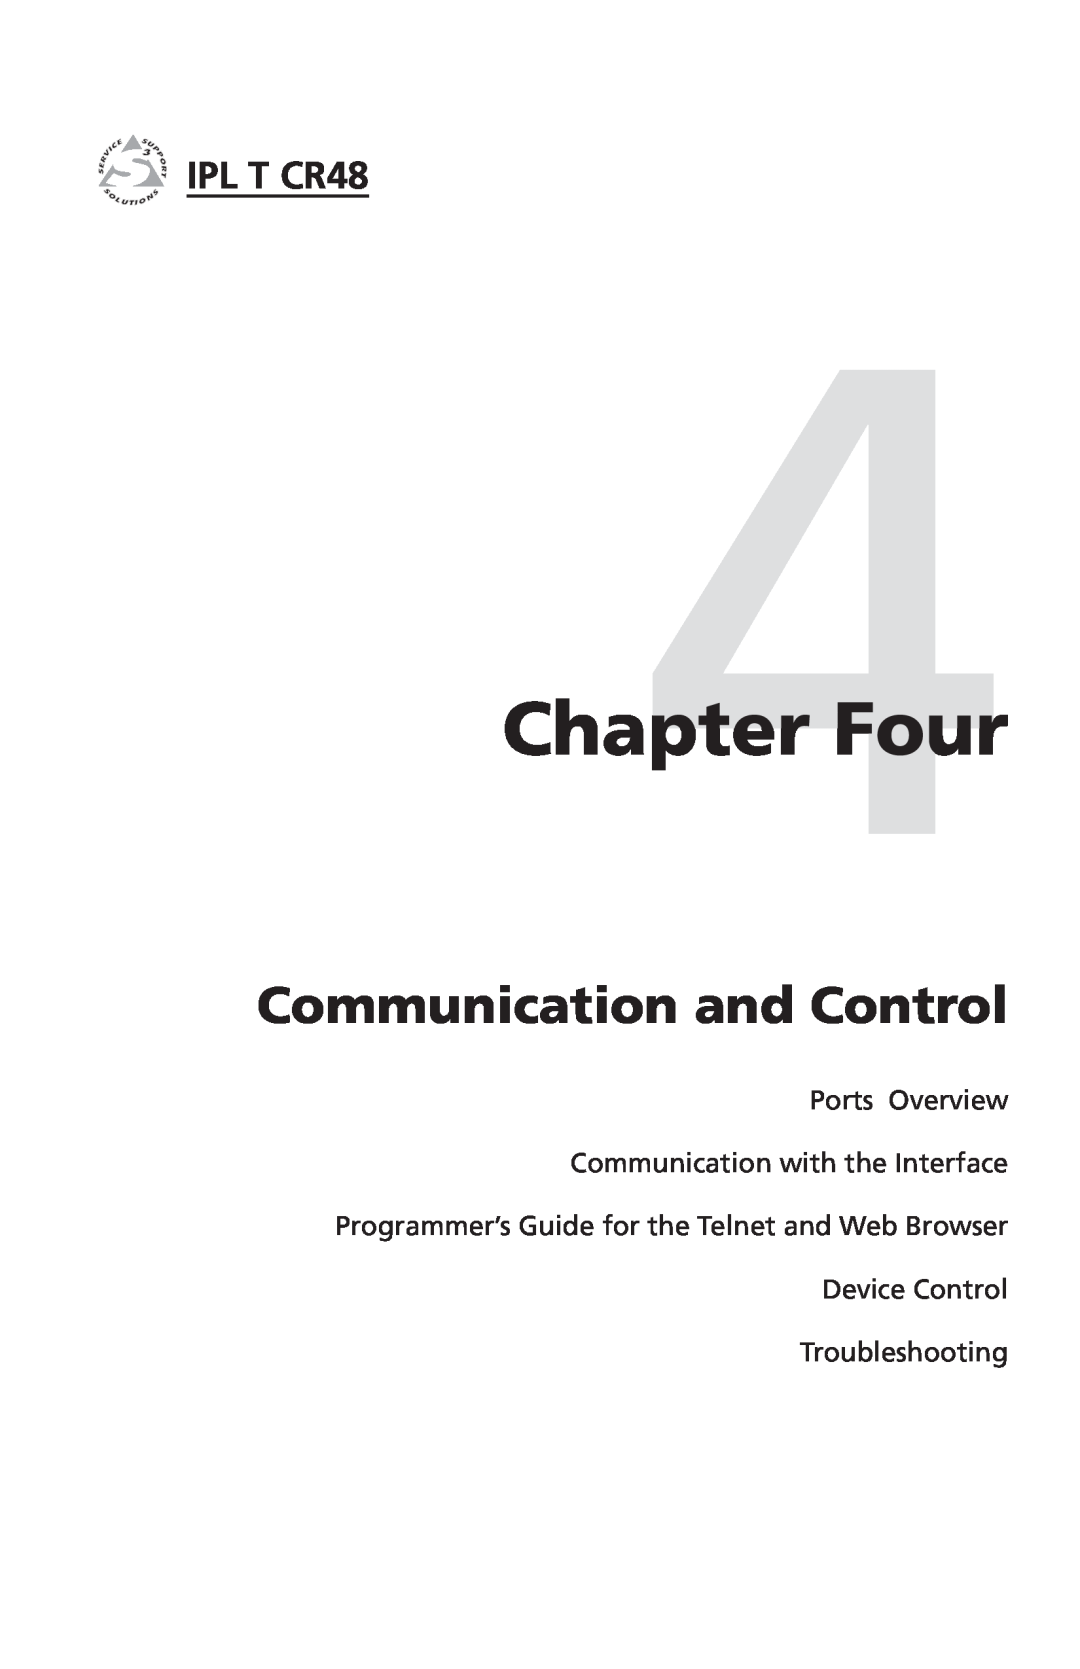 Extron electronic IPL T CR48 manual Four, Communication and Control, Ports Overview Communication with the Interface 